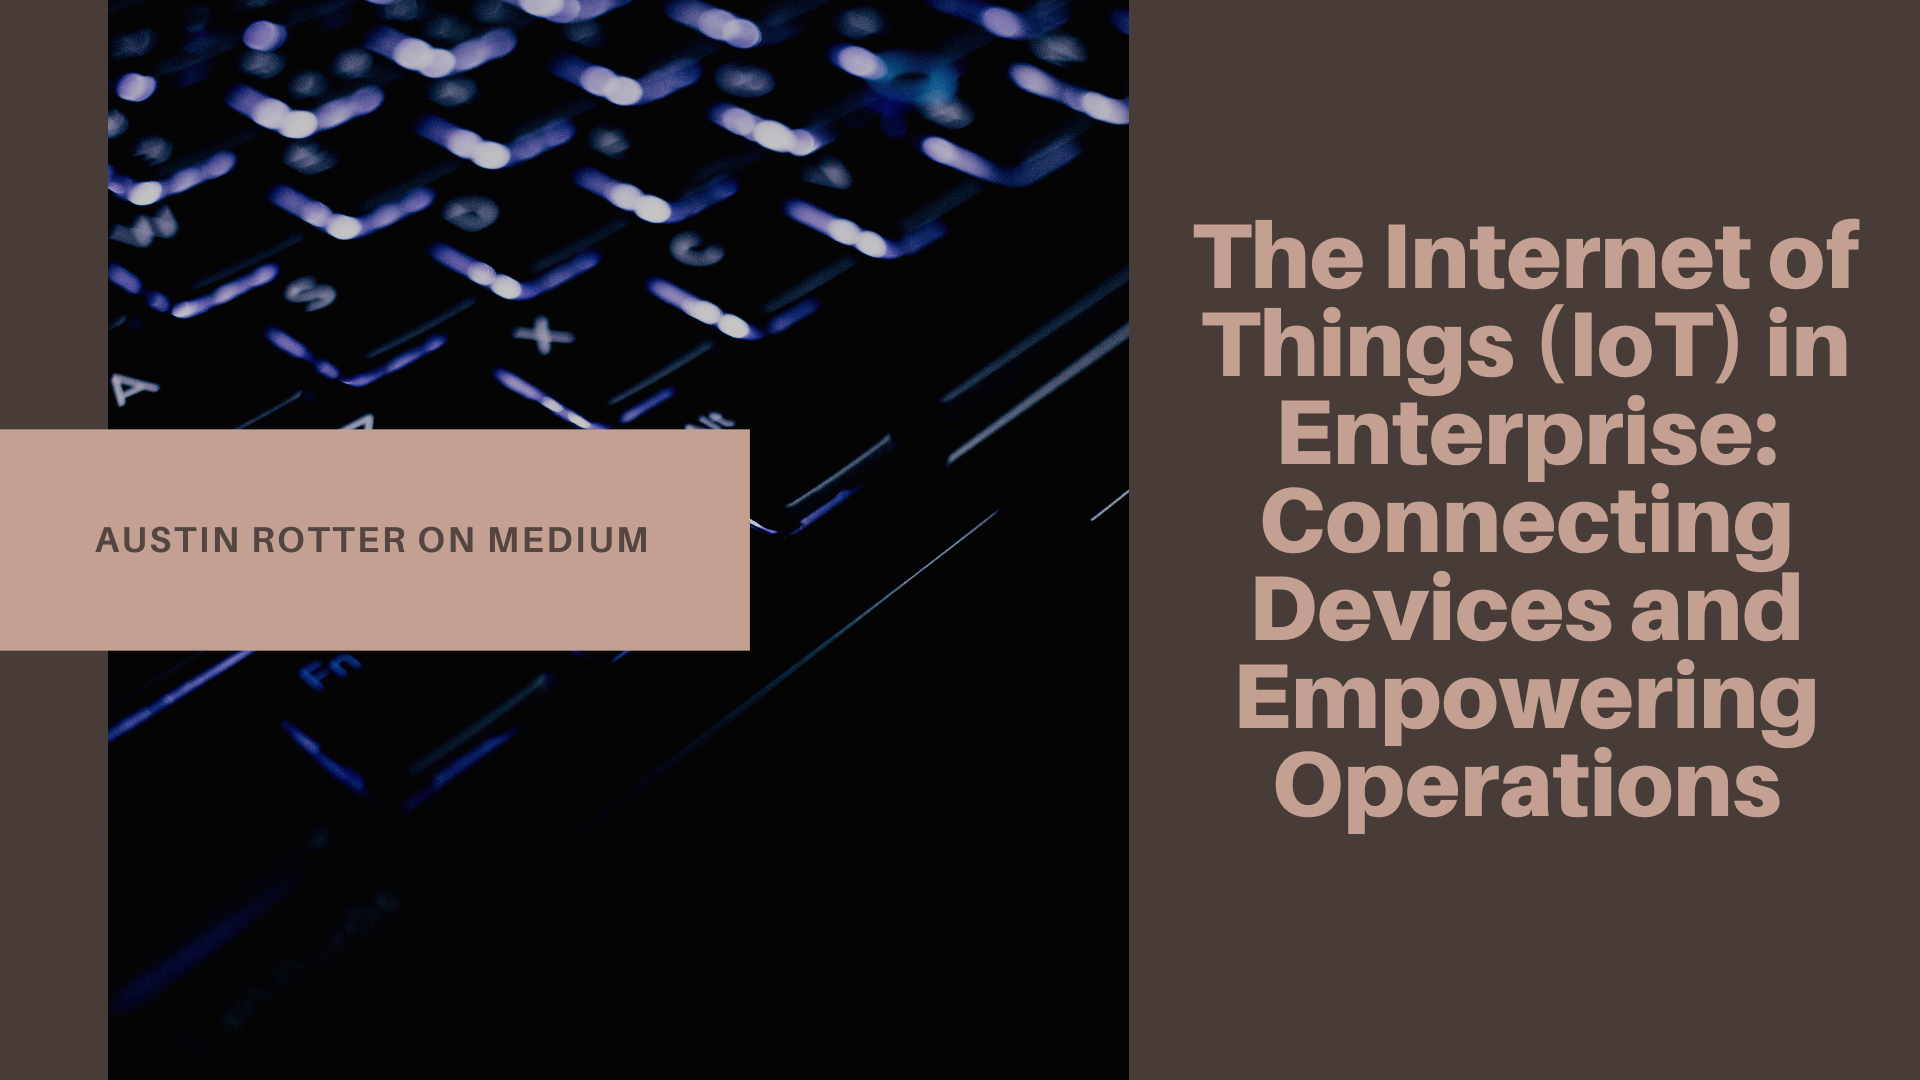 ® ? a fa o
Od a RY -
PR < > LU RETO EL
= SNF Things (IoT) in
/ Enterprise:
AUSTIN ROTTER ON MEDIUM ) pe dq Connecting
| Devices and
Empowering

Operations